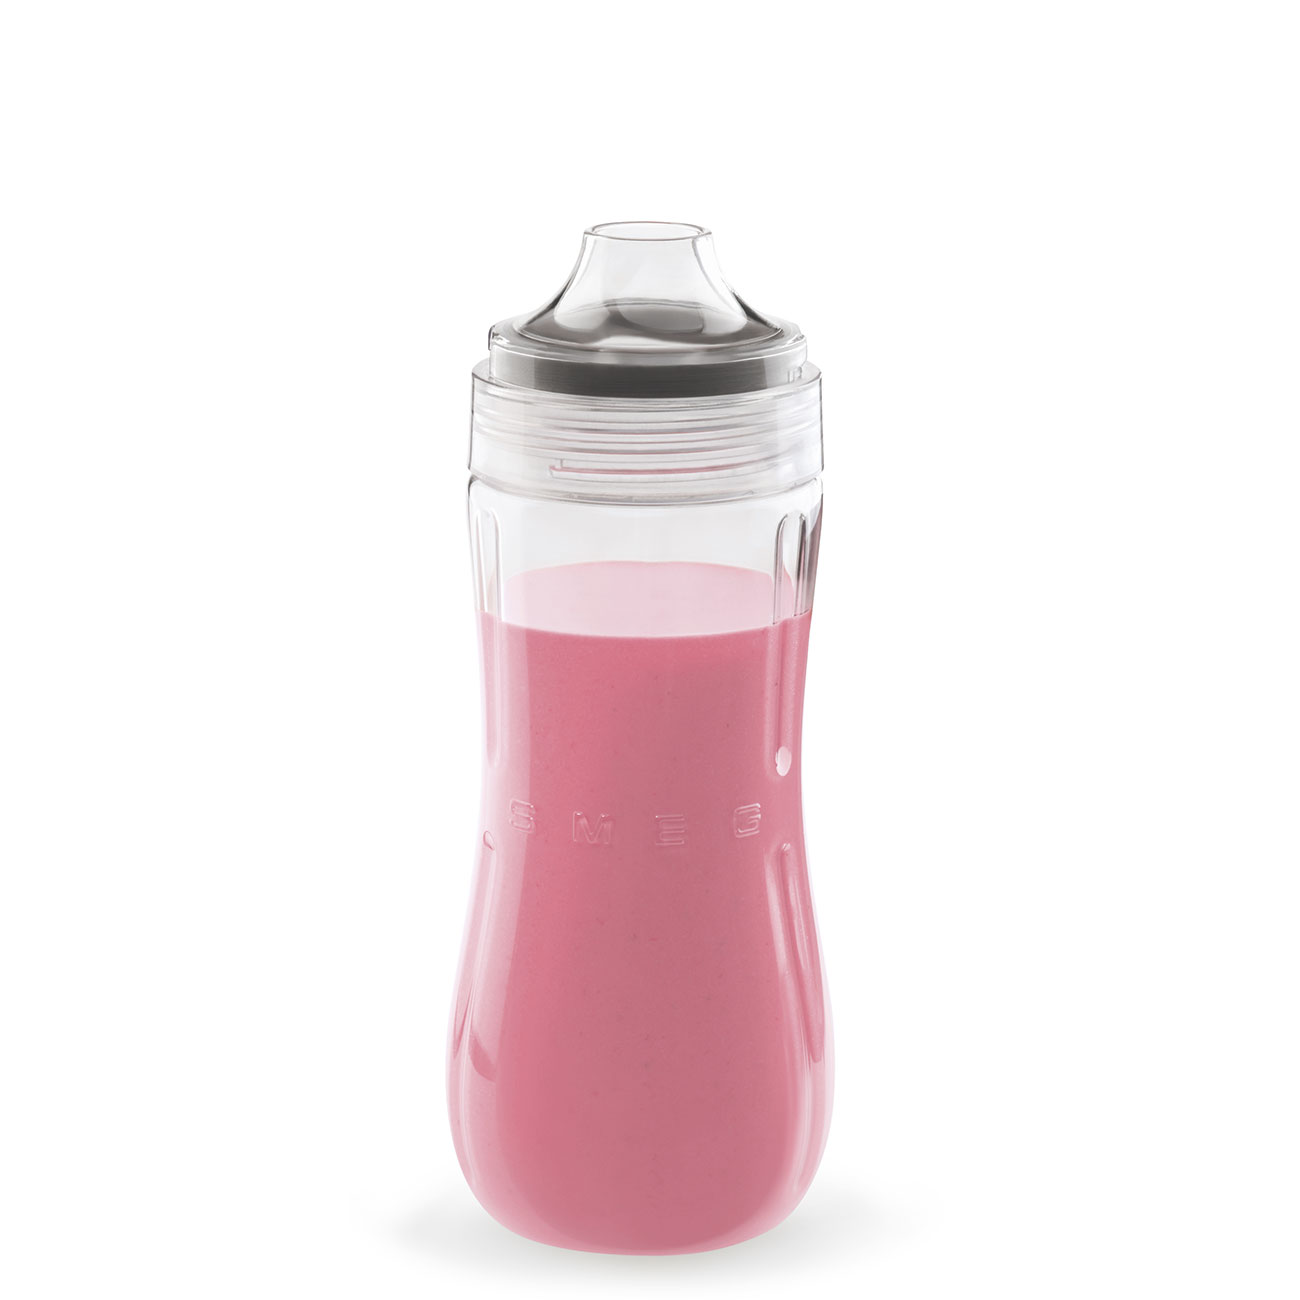 Bottle To Go with blades accessory for Smeg Blender - BGF01_10